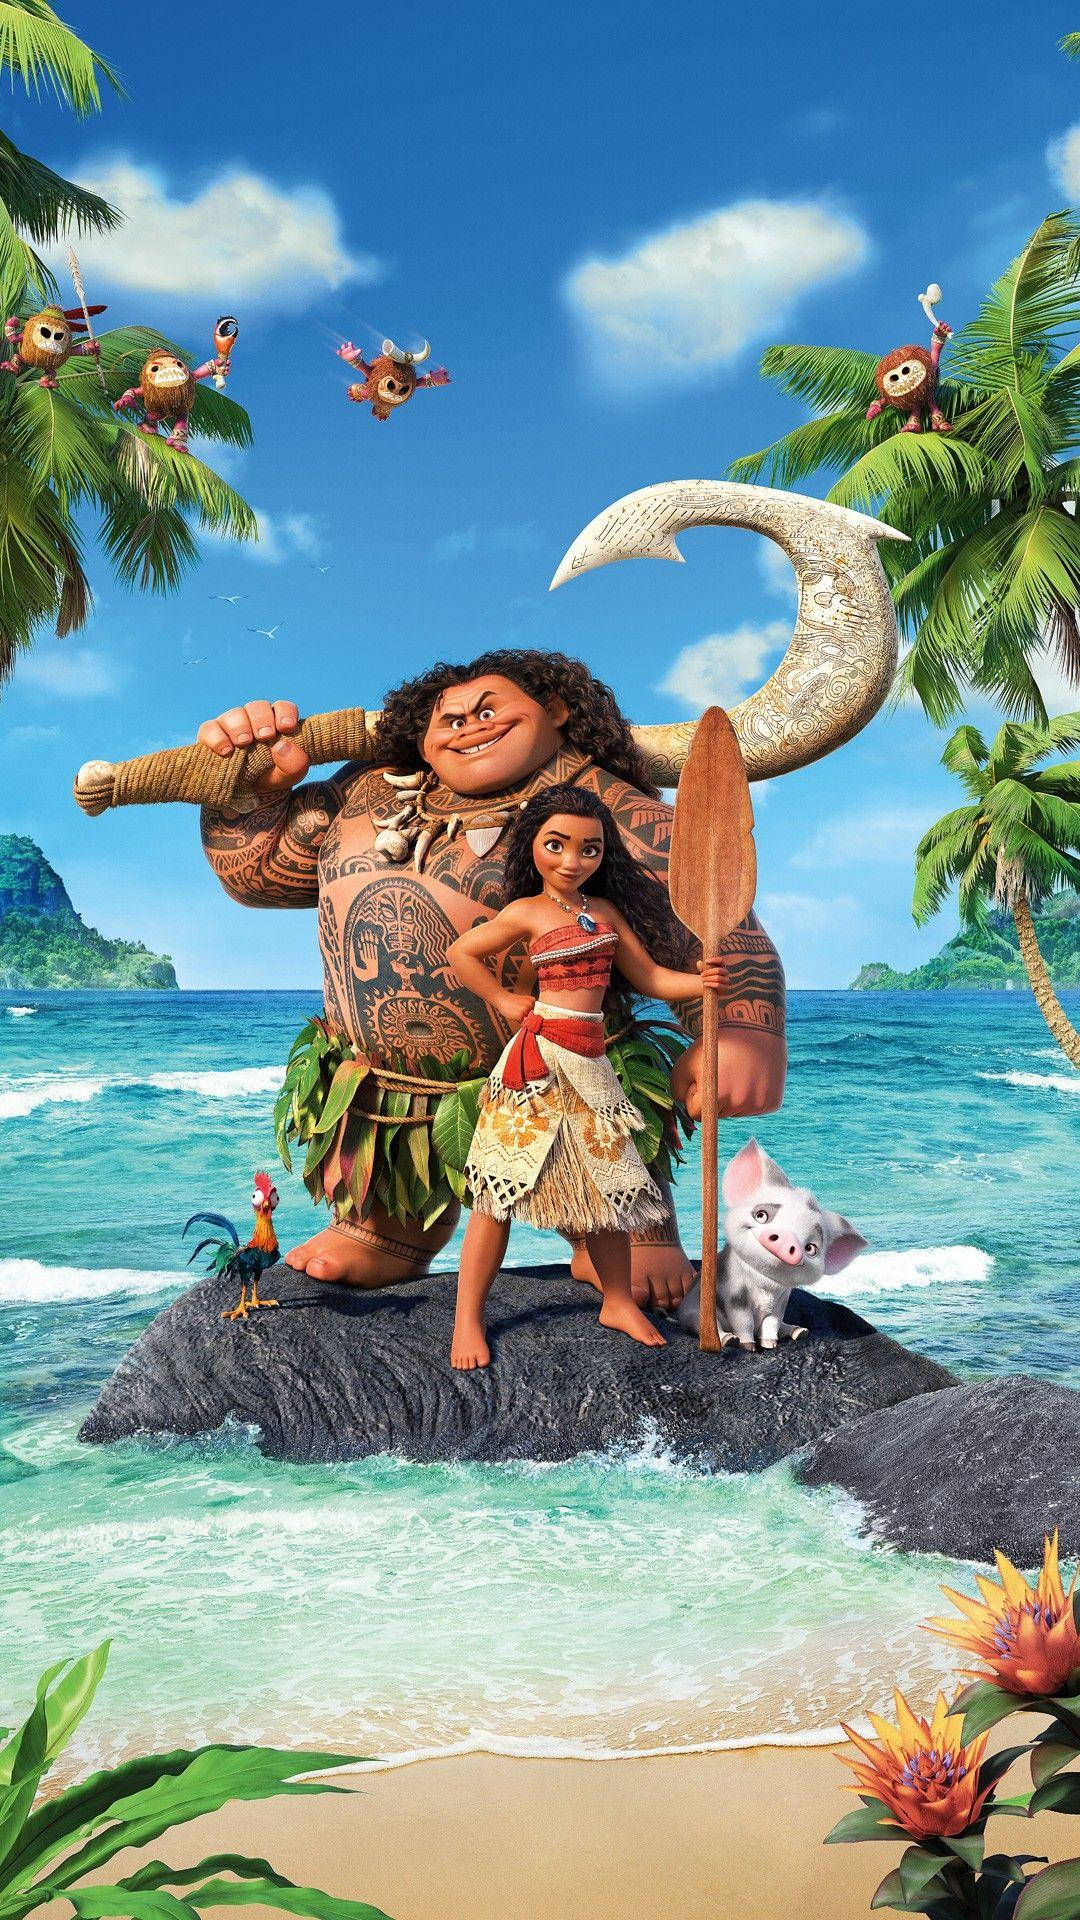 Astounding 8K display of the Moana Movie Poster on an iPhone Wallpaper